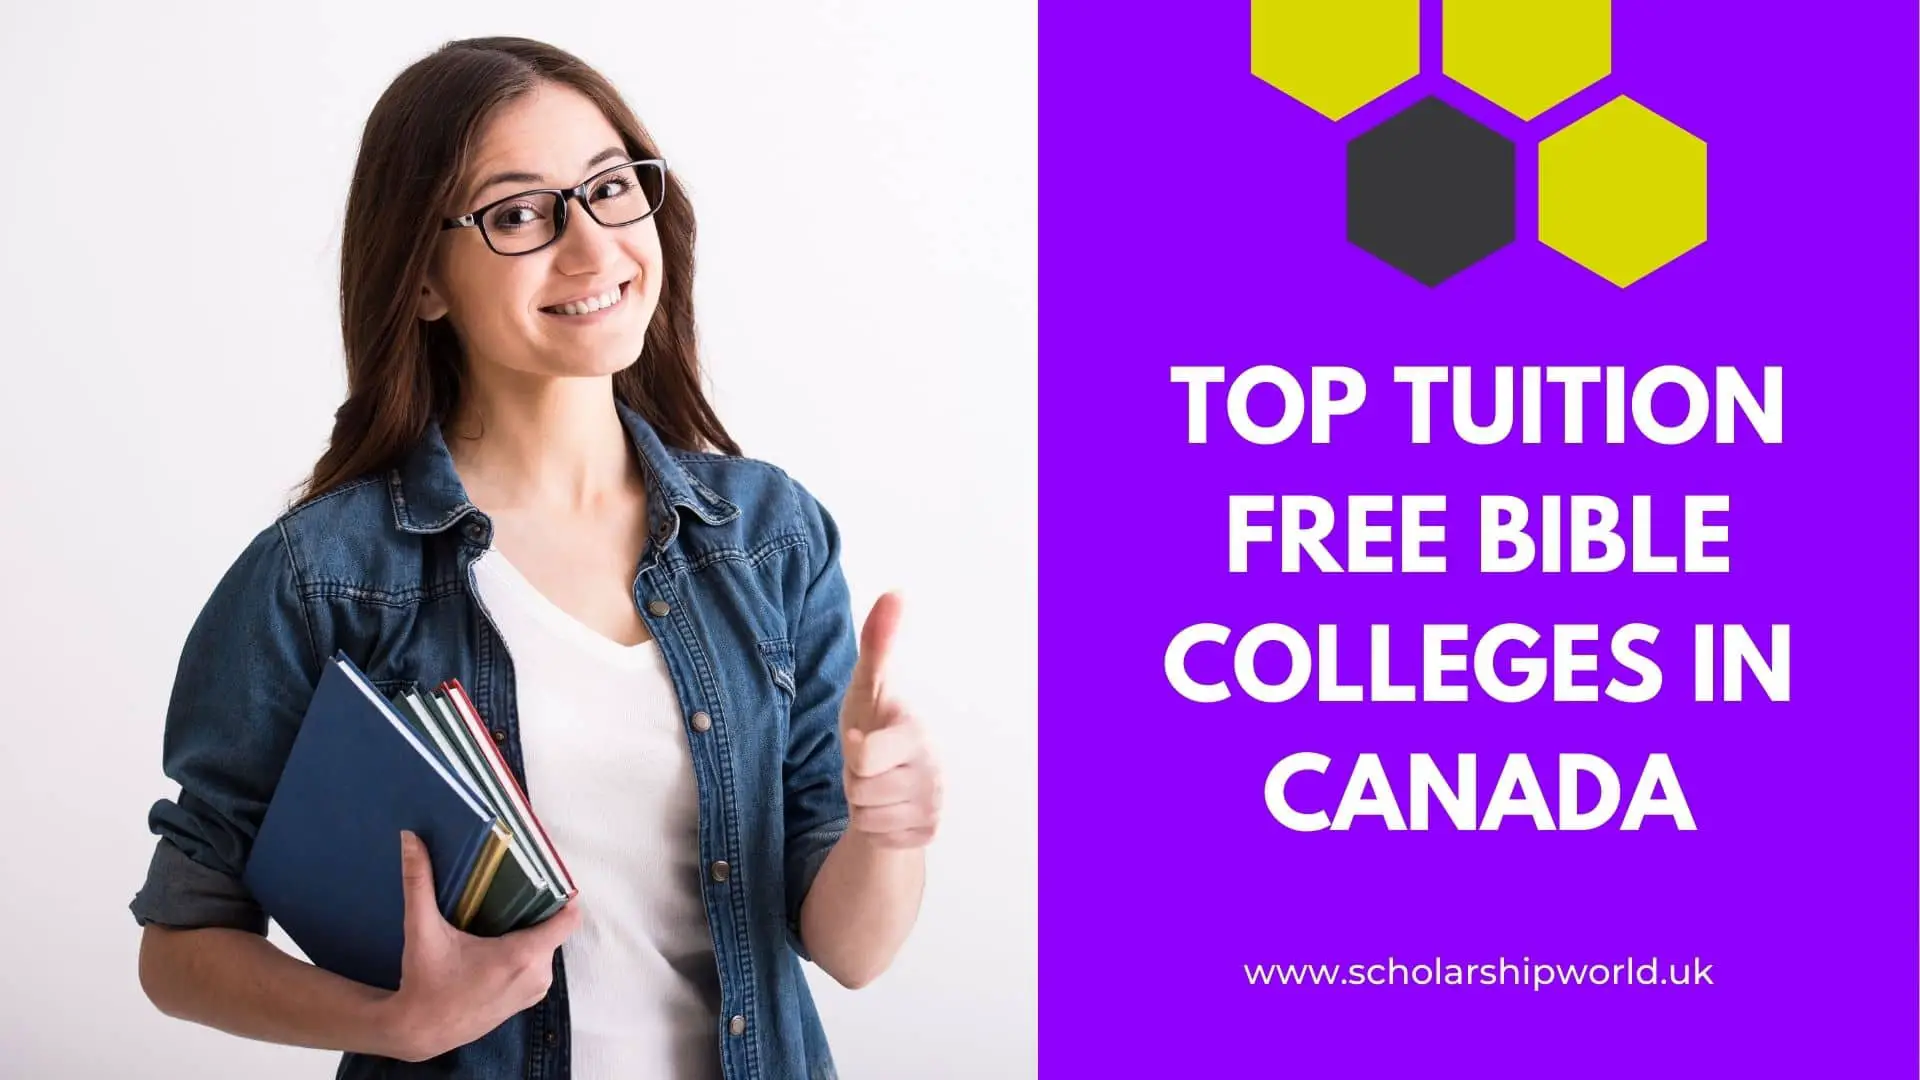 Top Tuition Free Bible Colleges In Canada